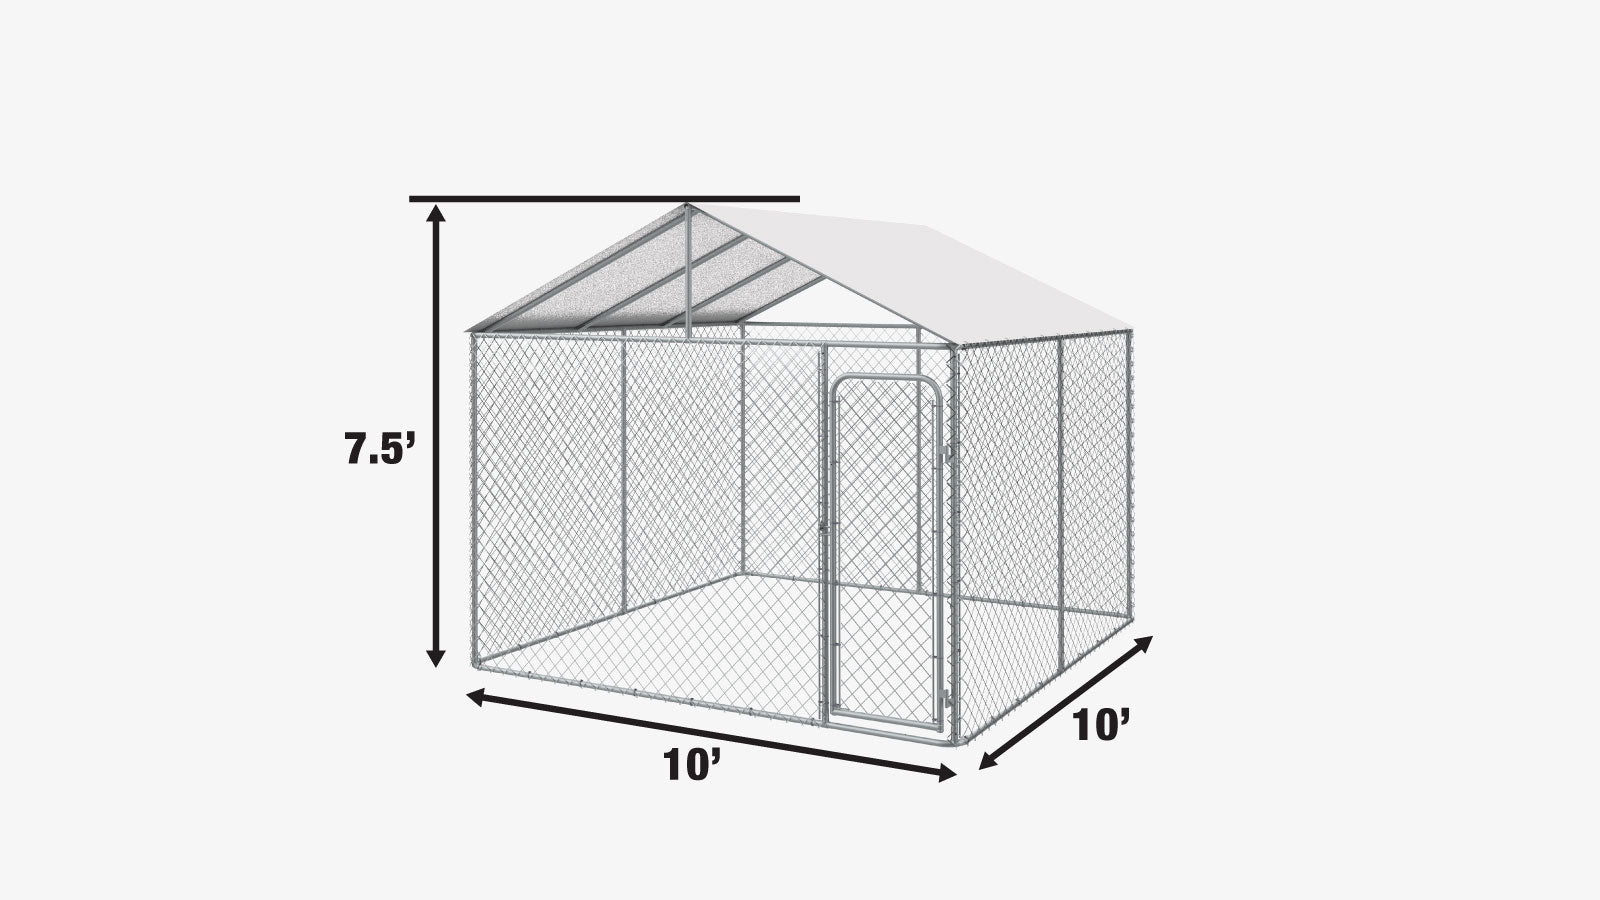 TMG Industrial 10’ x 10’ Outdoor Dog Kennel Playpen w/Cover, Outdoor Dog Runner, Pet Exercise House, Lockable Gate, 6’ Chain-Link Fence, TMG-DCP1010-specifications-image